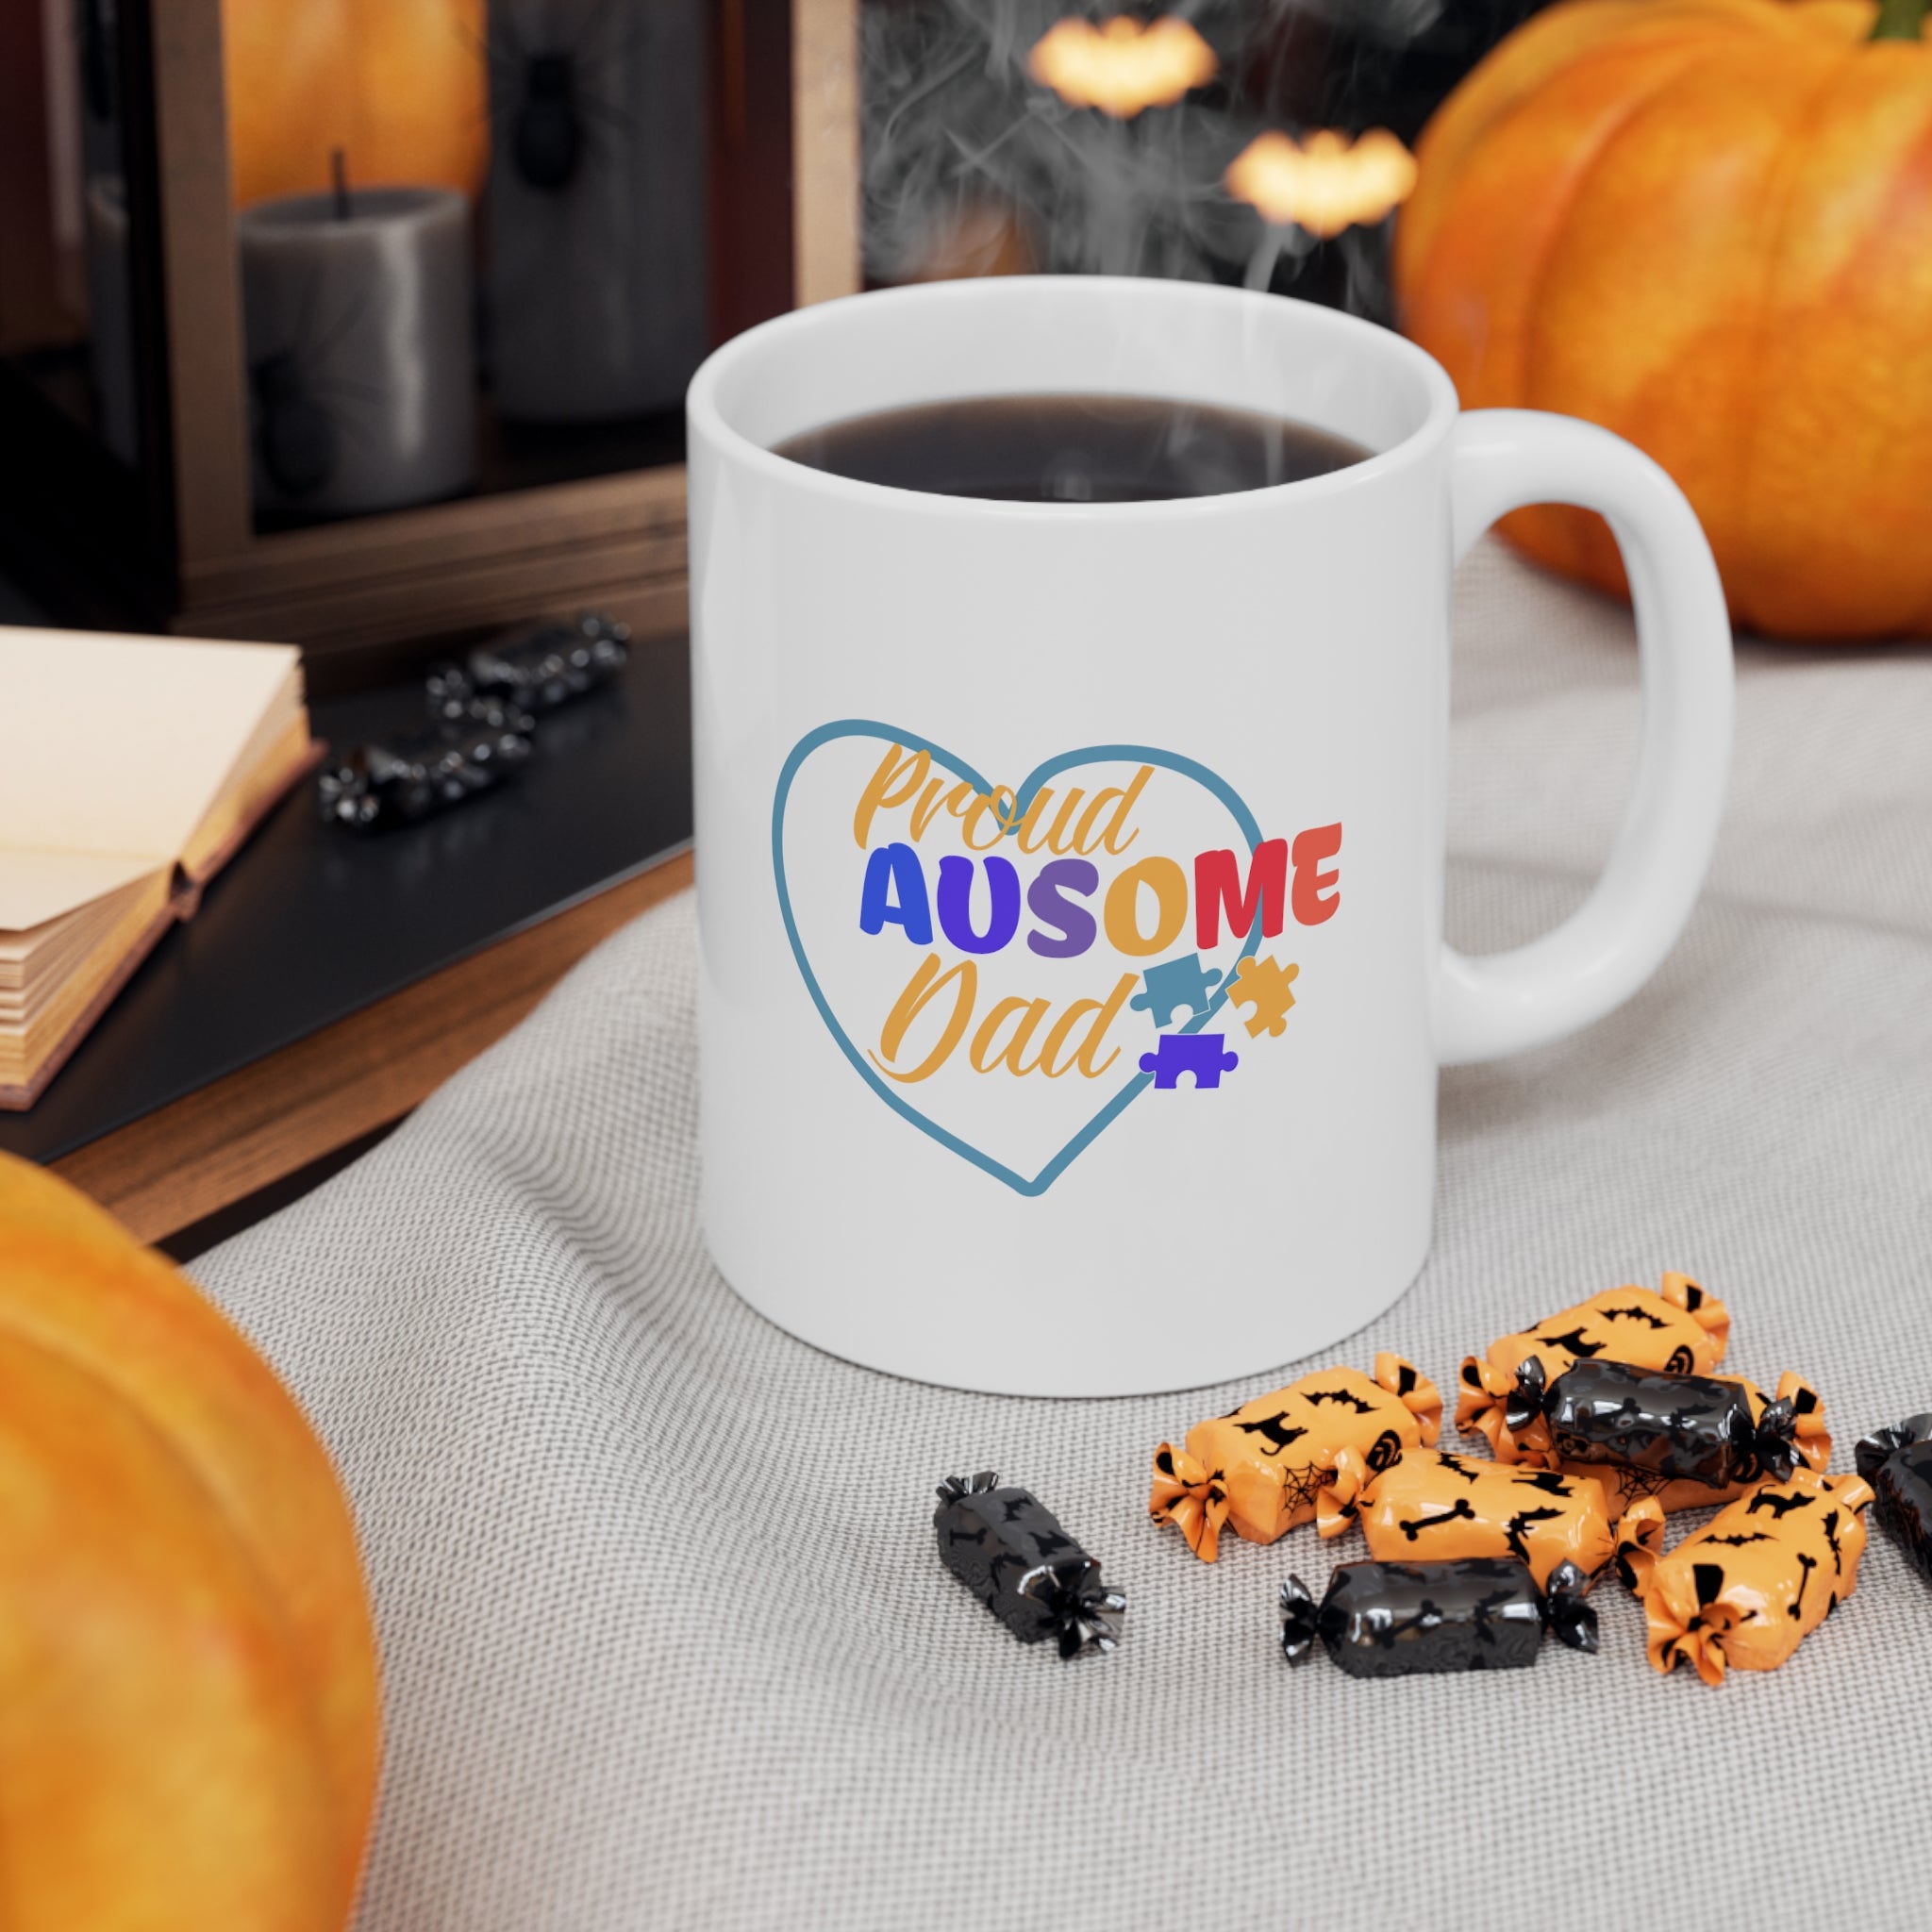 "Ausome Dad" Autism Awareness and Support Ceramic Mug 11oz: Celebrating Exceptional Fathers with Every Sip - A Heartfelt Tribute to Parenthood and Understanding